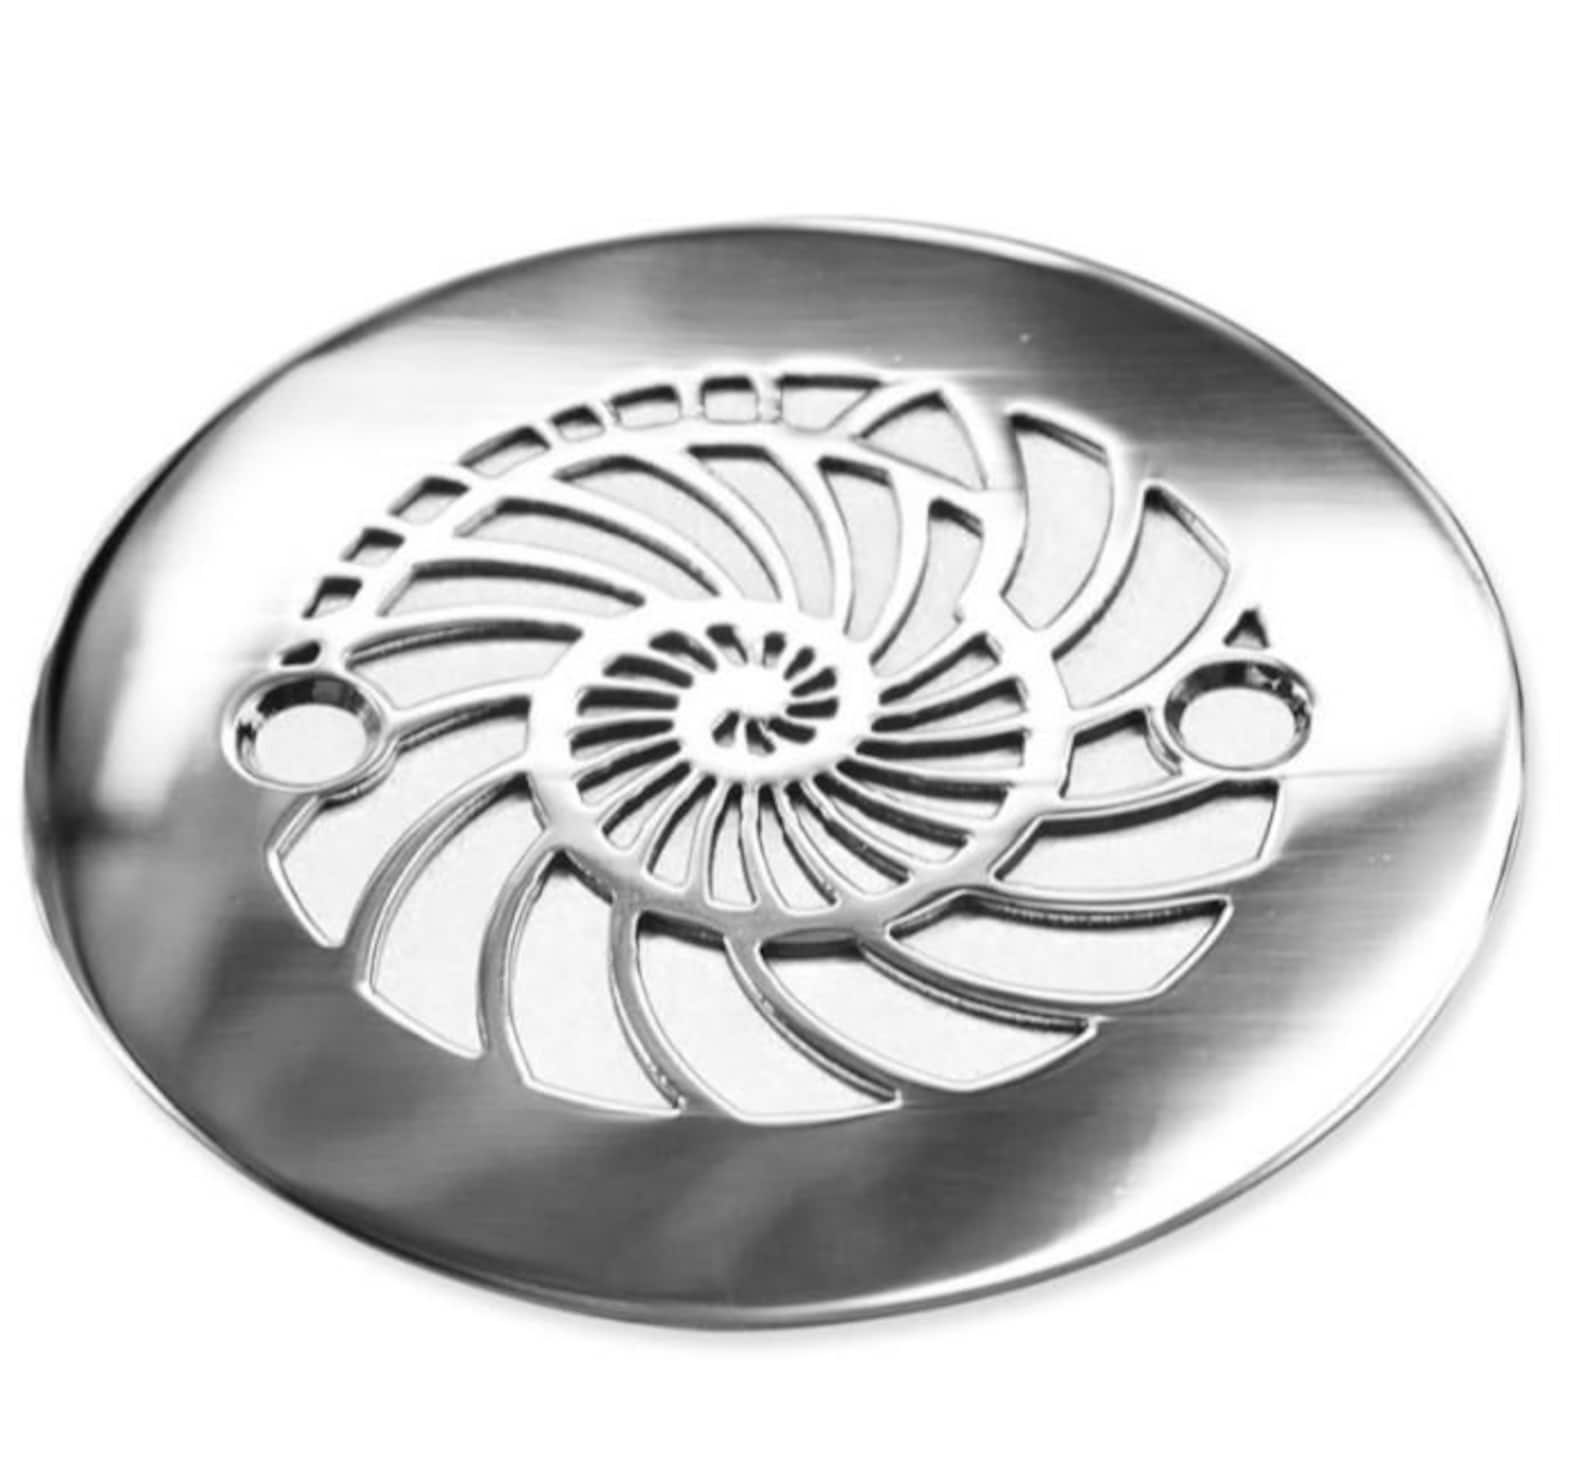 4.25 Inch Shower Drain Cover Nautilus Design Shower Drain by Etsy